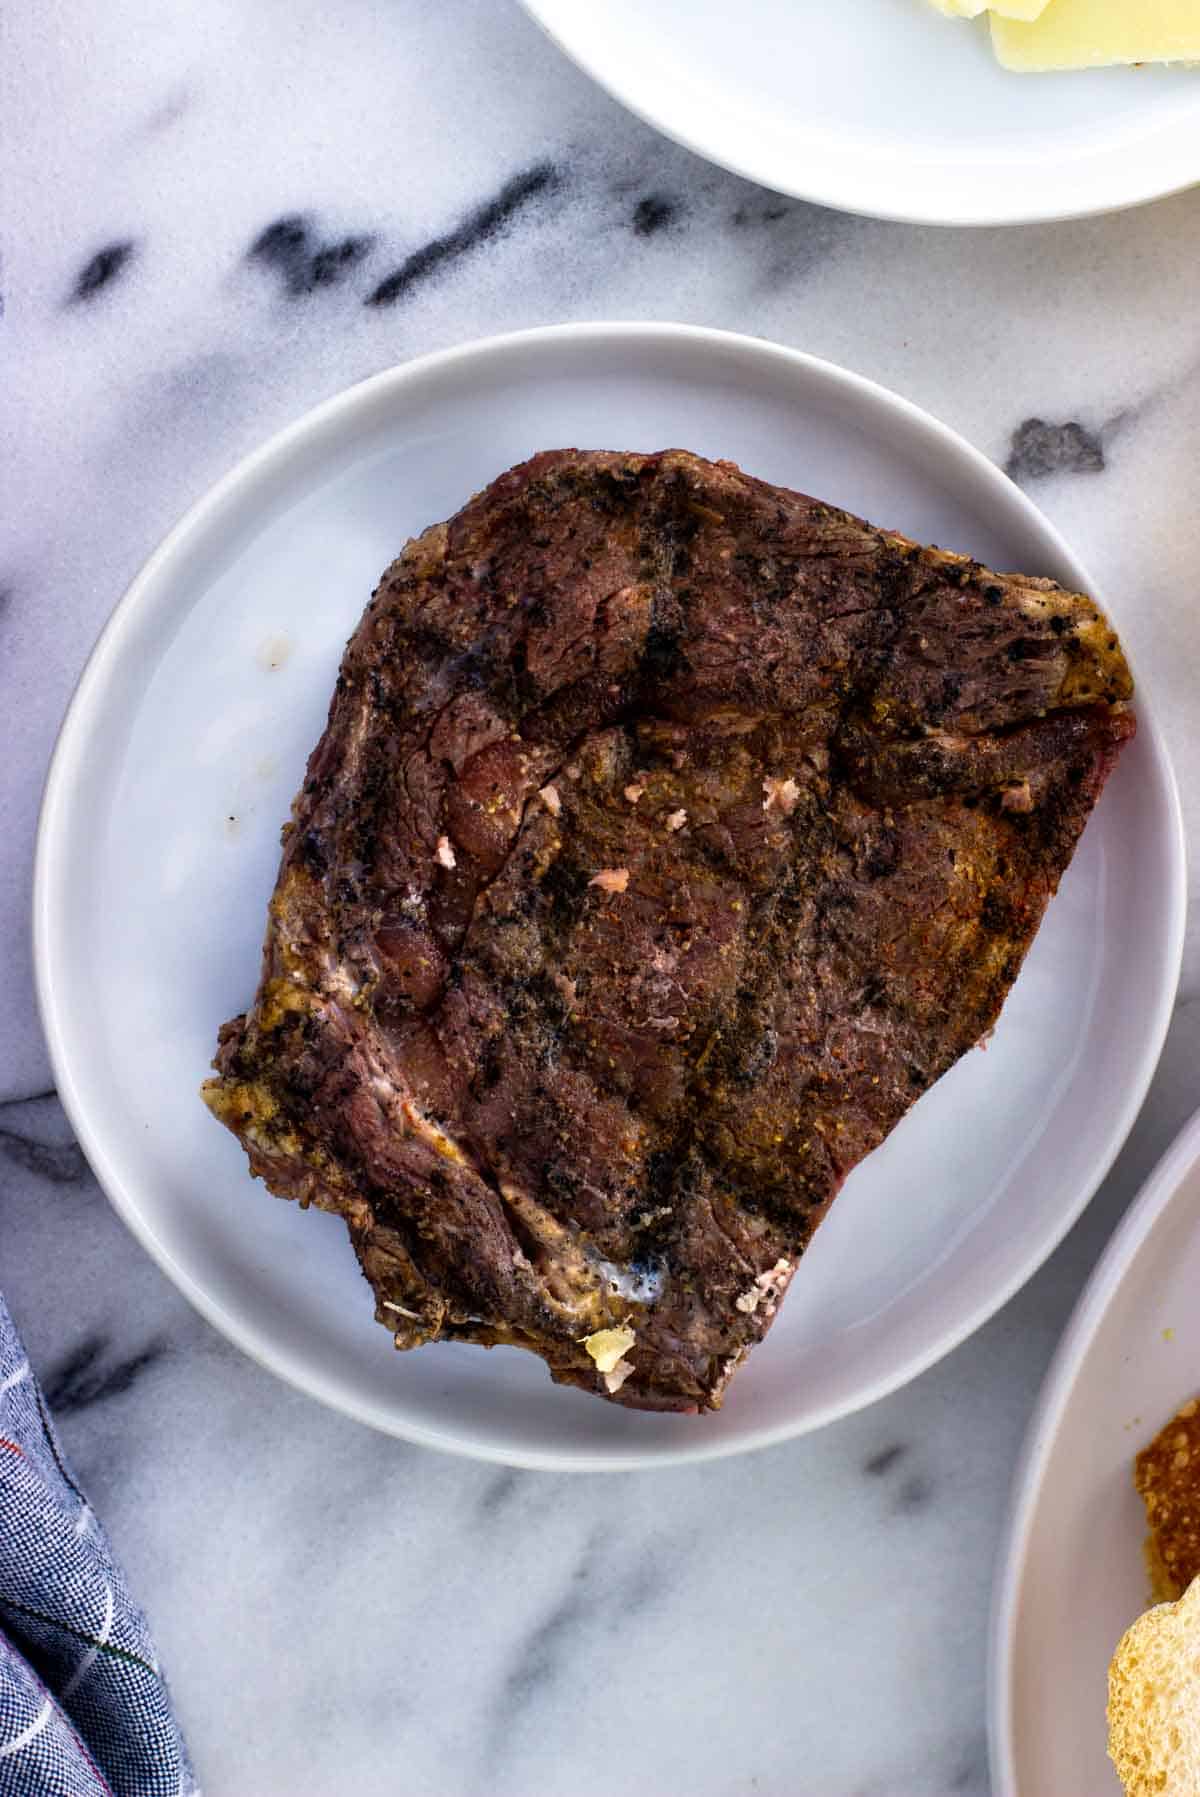 A piece of cooked steak on a plate.